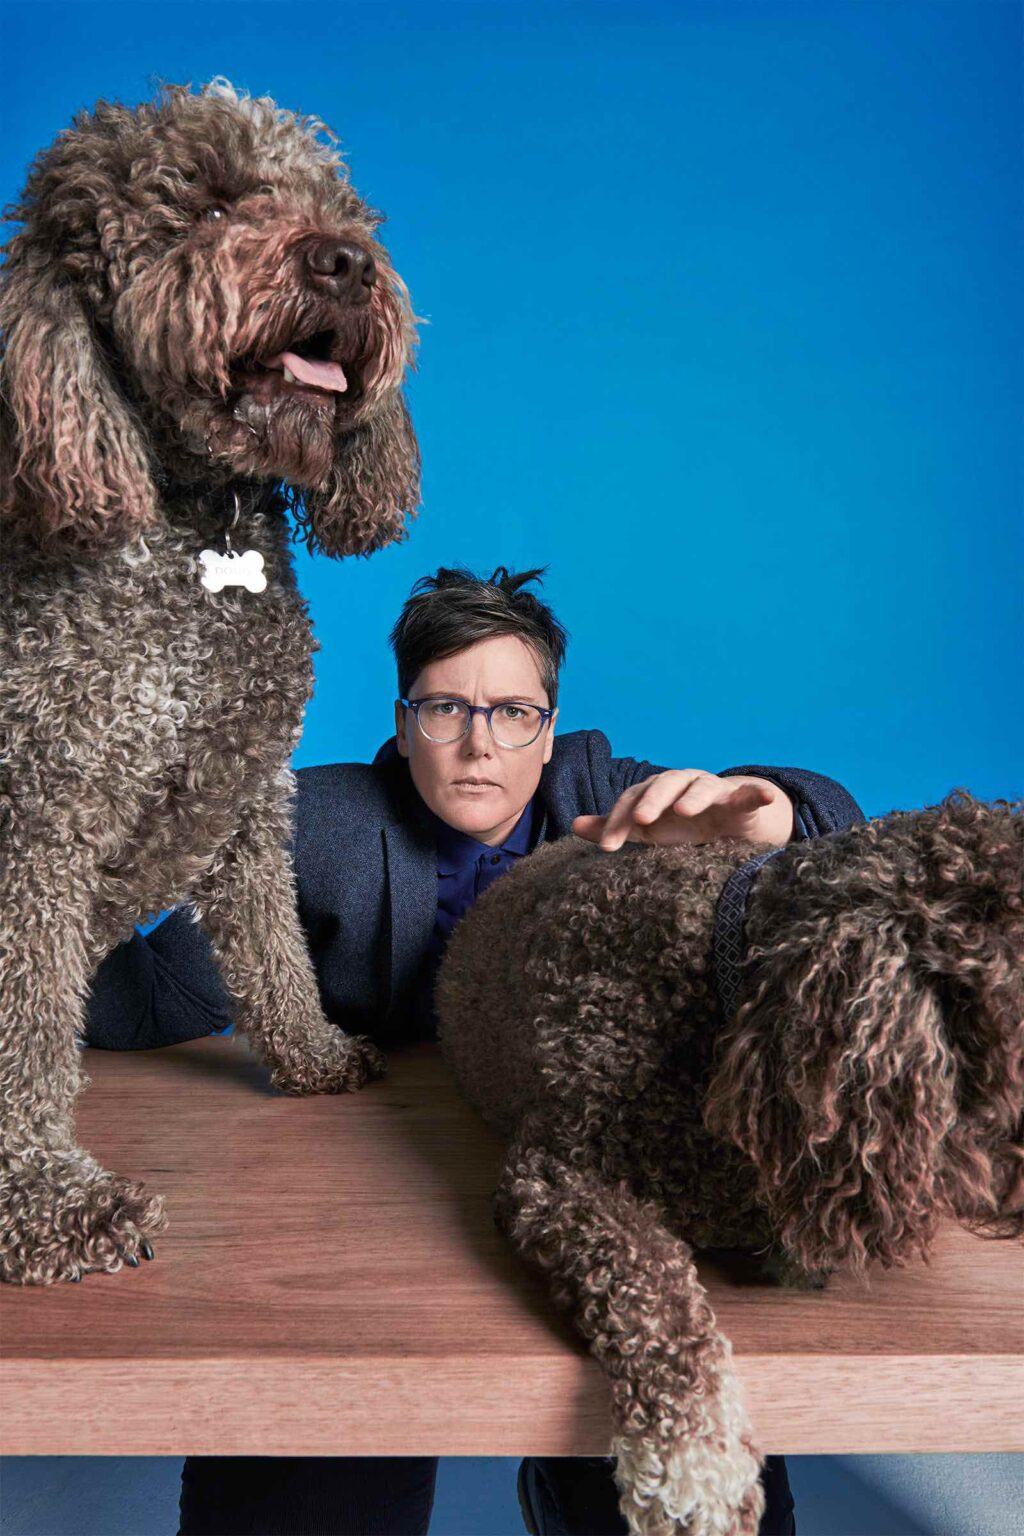 Hannah Gadsby is coming back, and the world needs her. Here's why Gadsby's Netflix special 'Douglas' is exactly what we need.